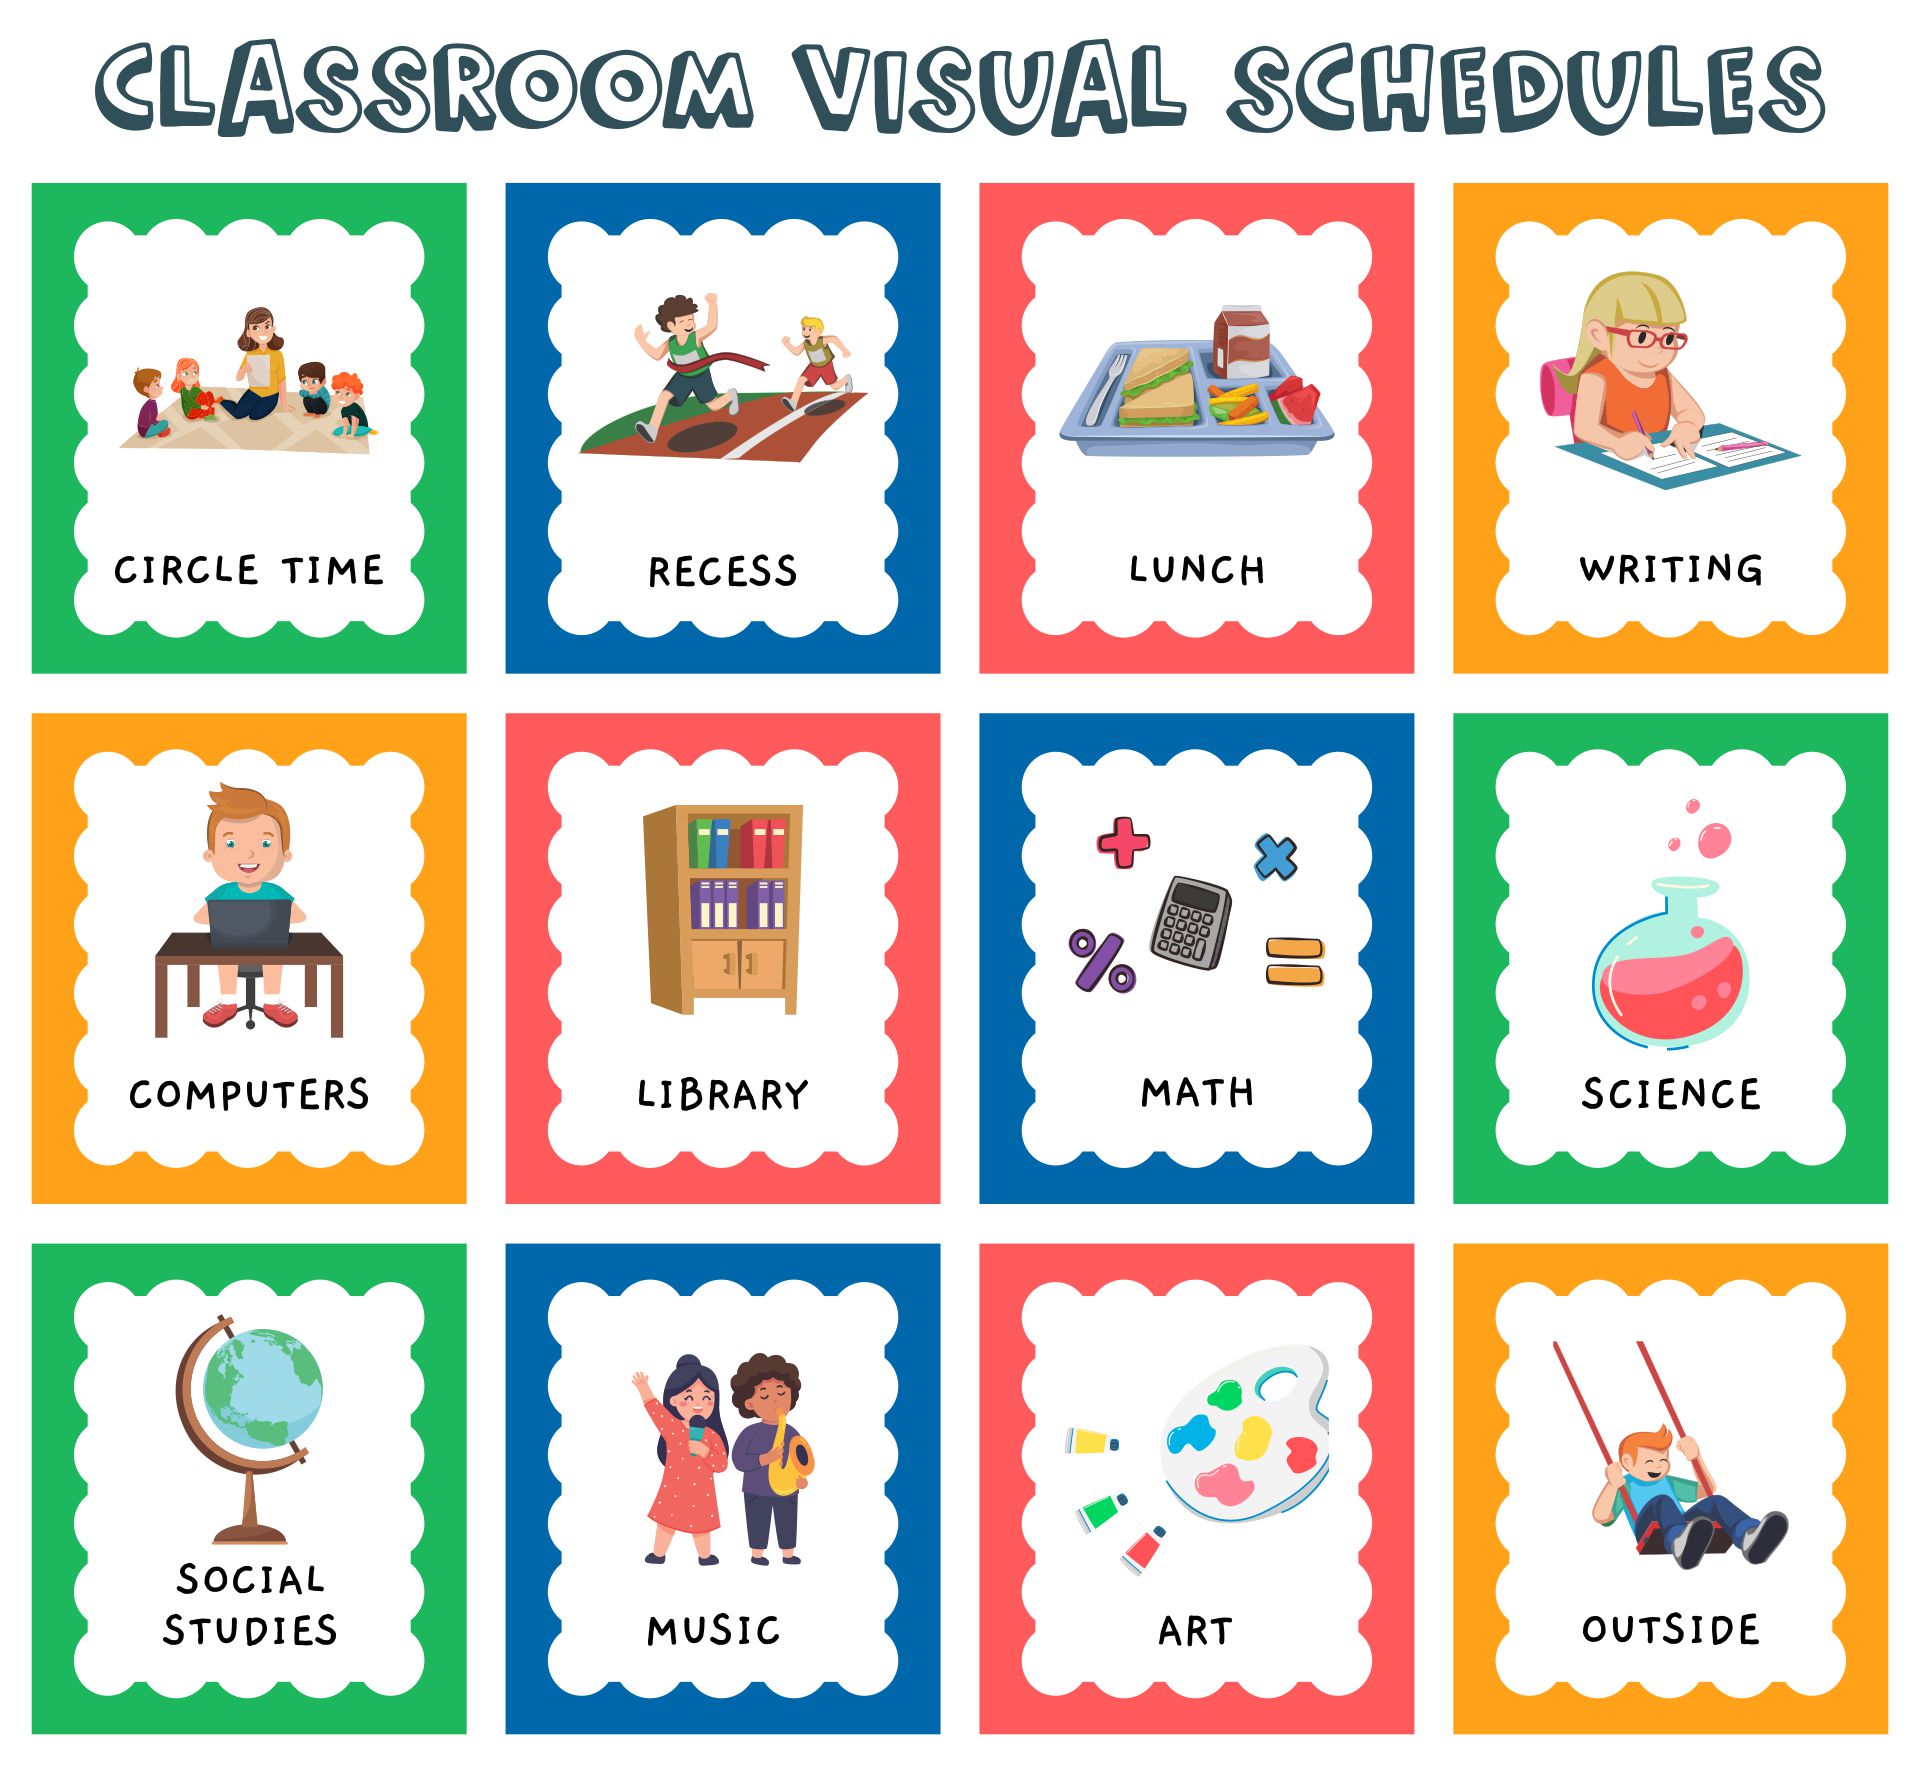 5-best-images-of-visual-classroom-schedule-printables-printable